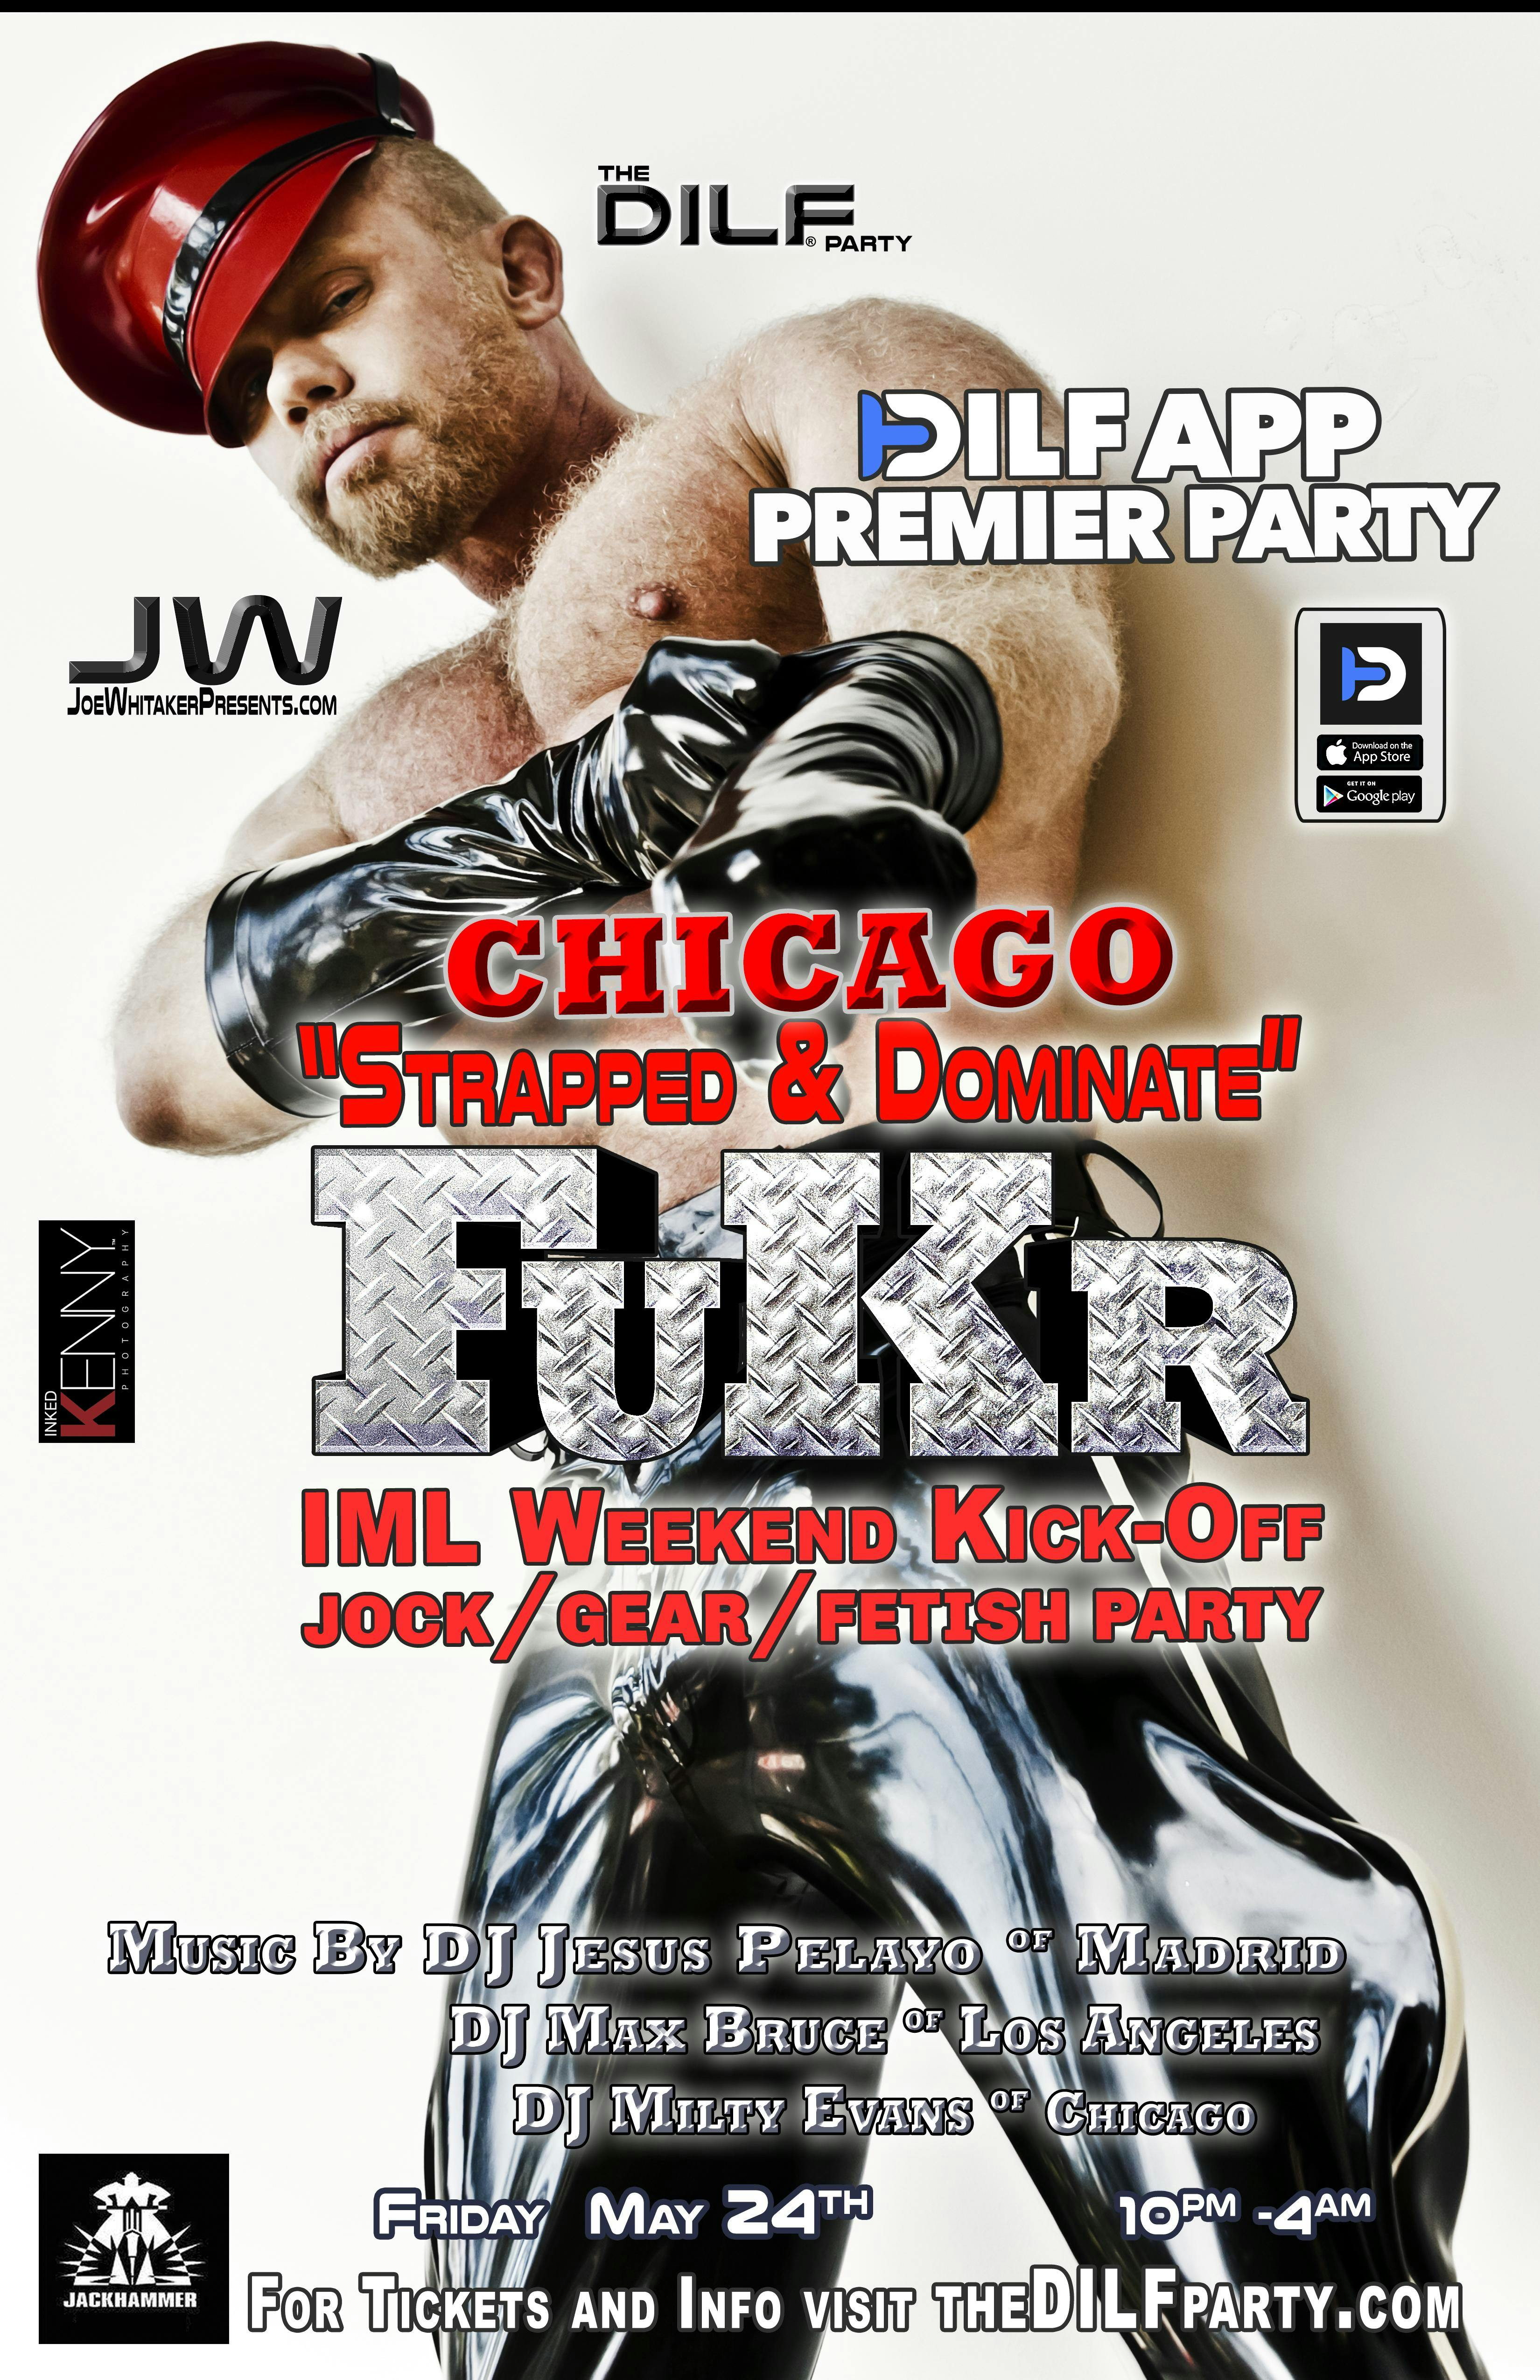 FuKR Chicago IML KICKOFF Strapped & Dominate Jock/Gear Party